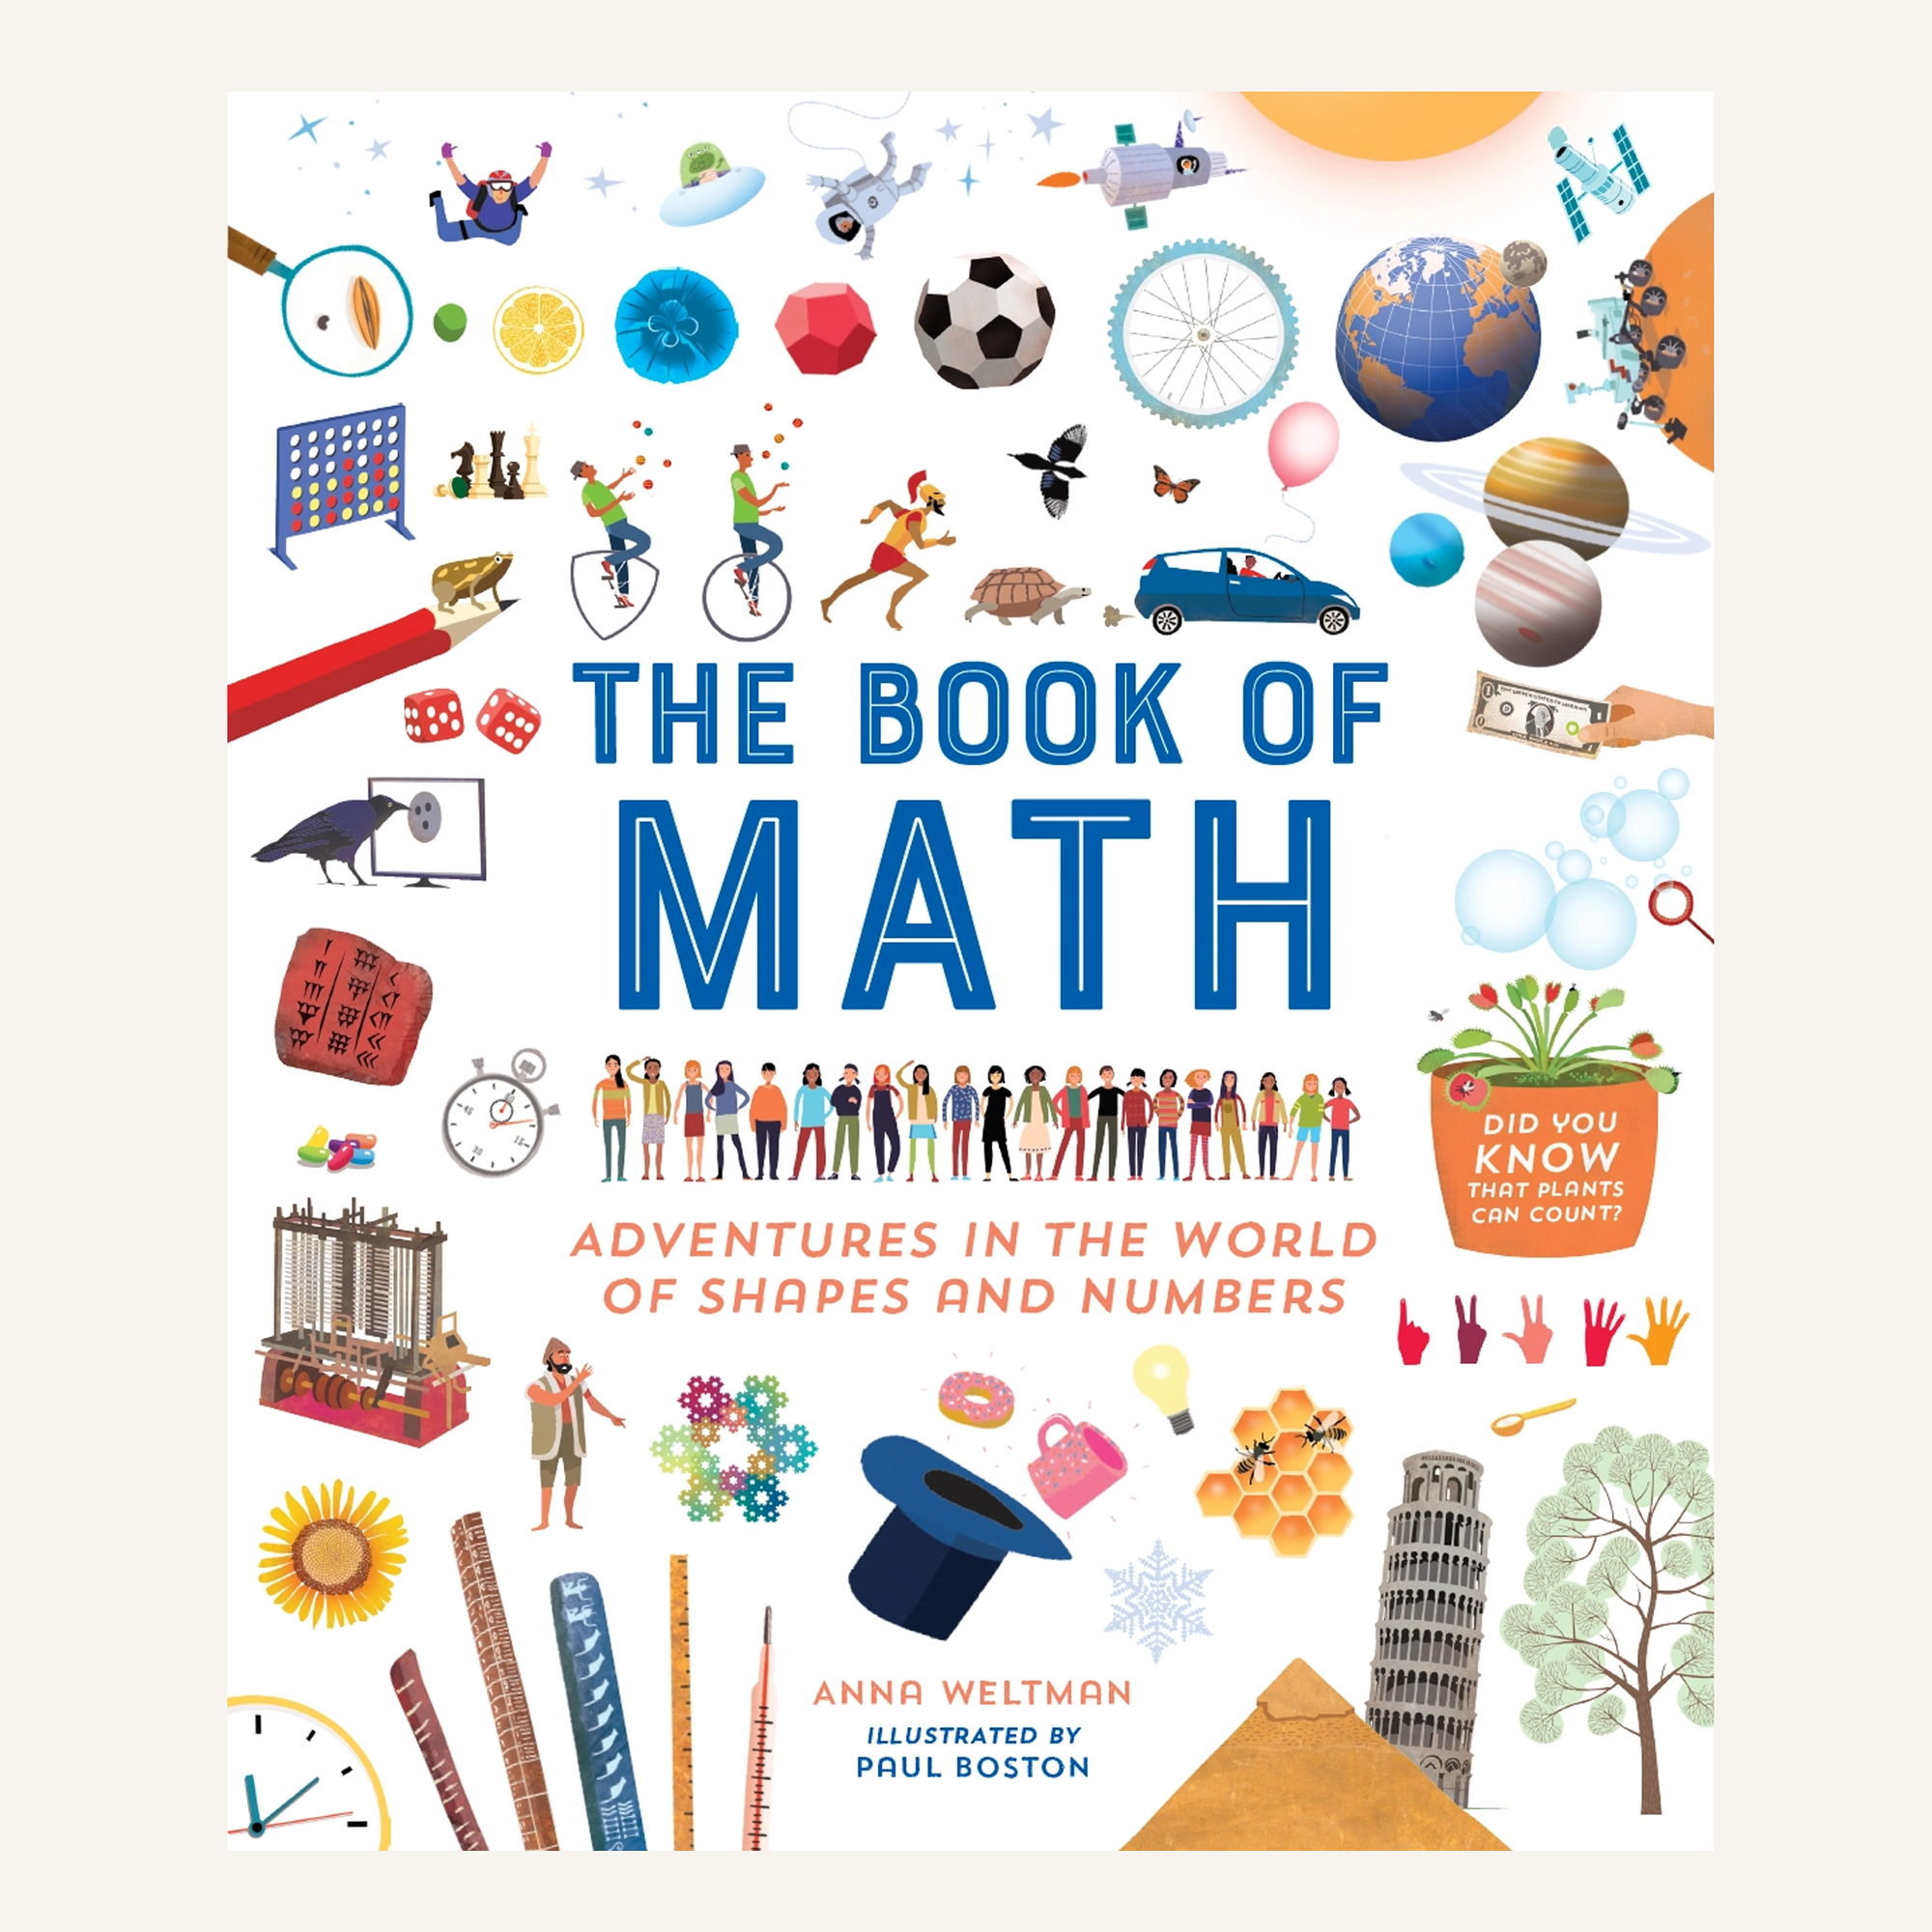 The Book of Math